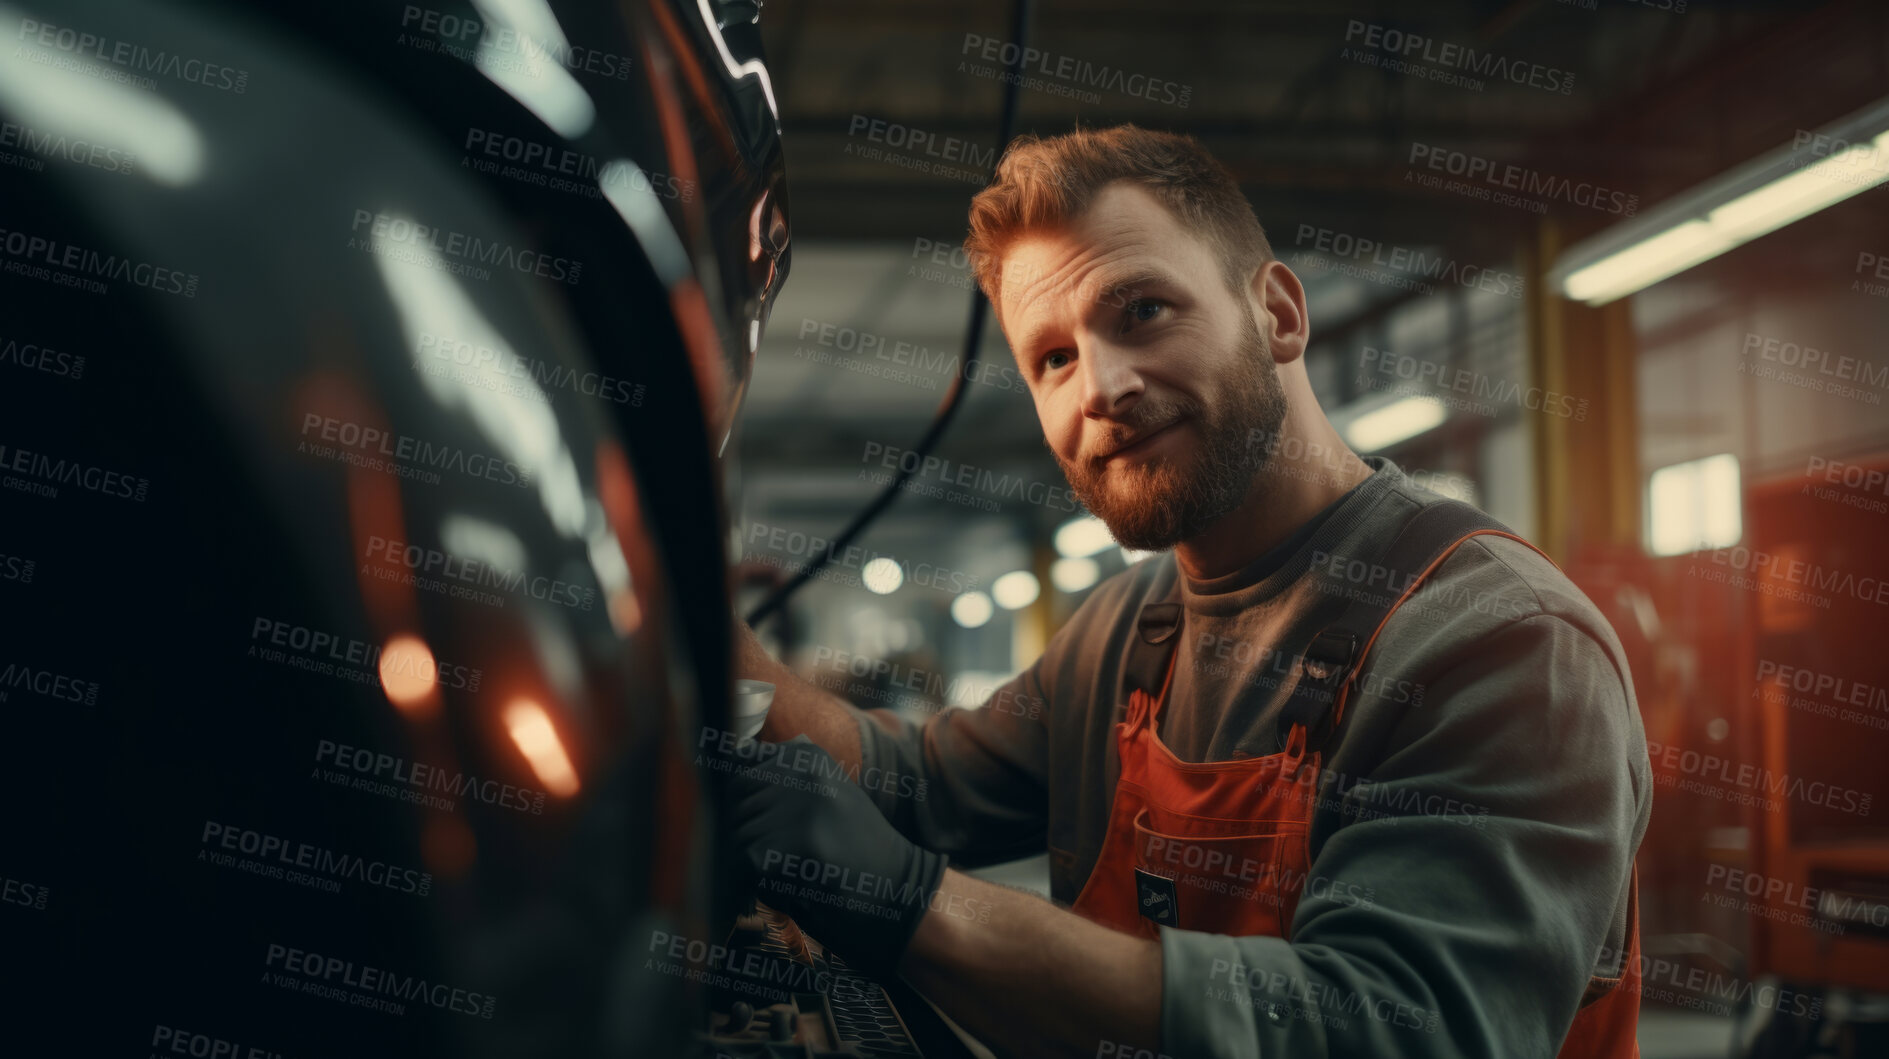 Buy stock photo Professional, mechanic or man working on vehicle or car engine. Close-up, face and crop for car parts and automobile service repair in a engineer or garage workshop